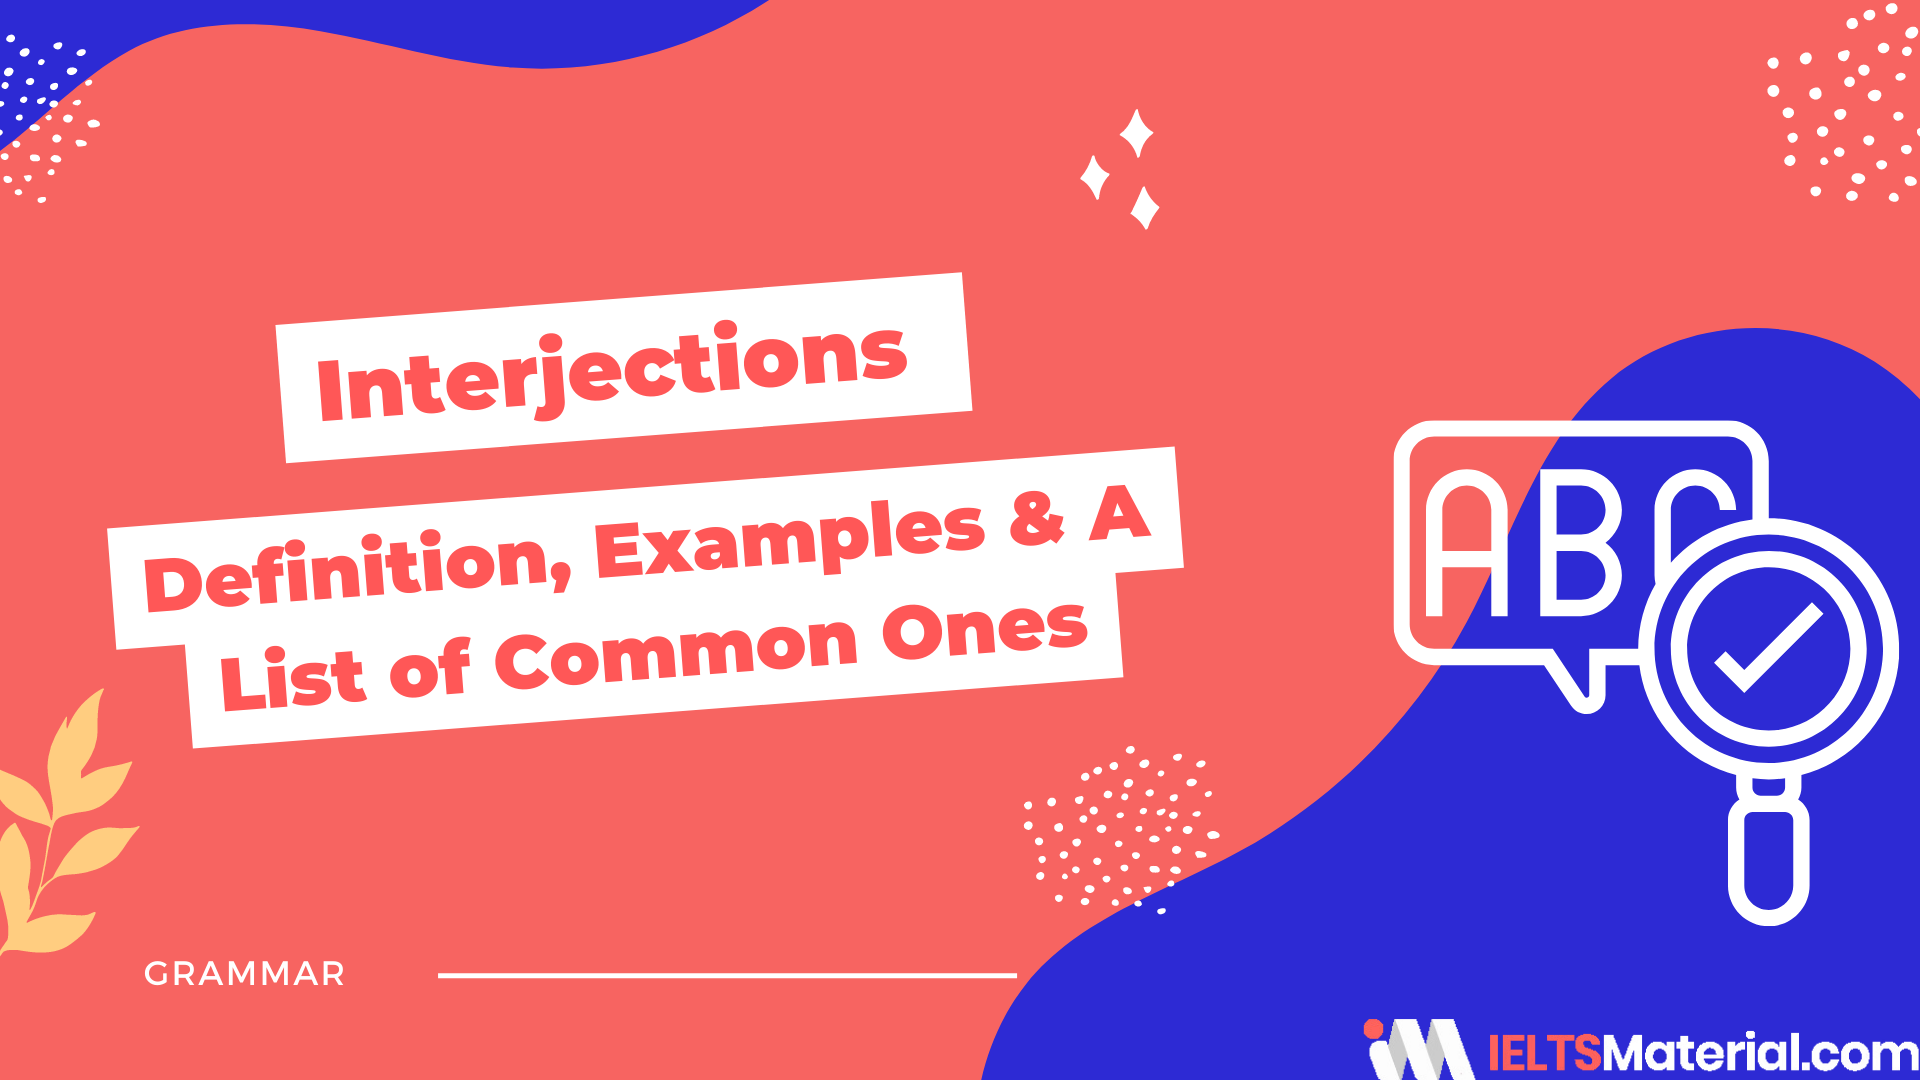 Interjection: Definition, Examples, and a List of Common Ones